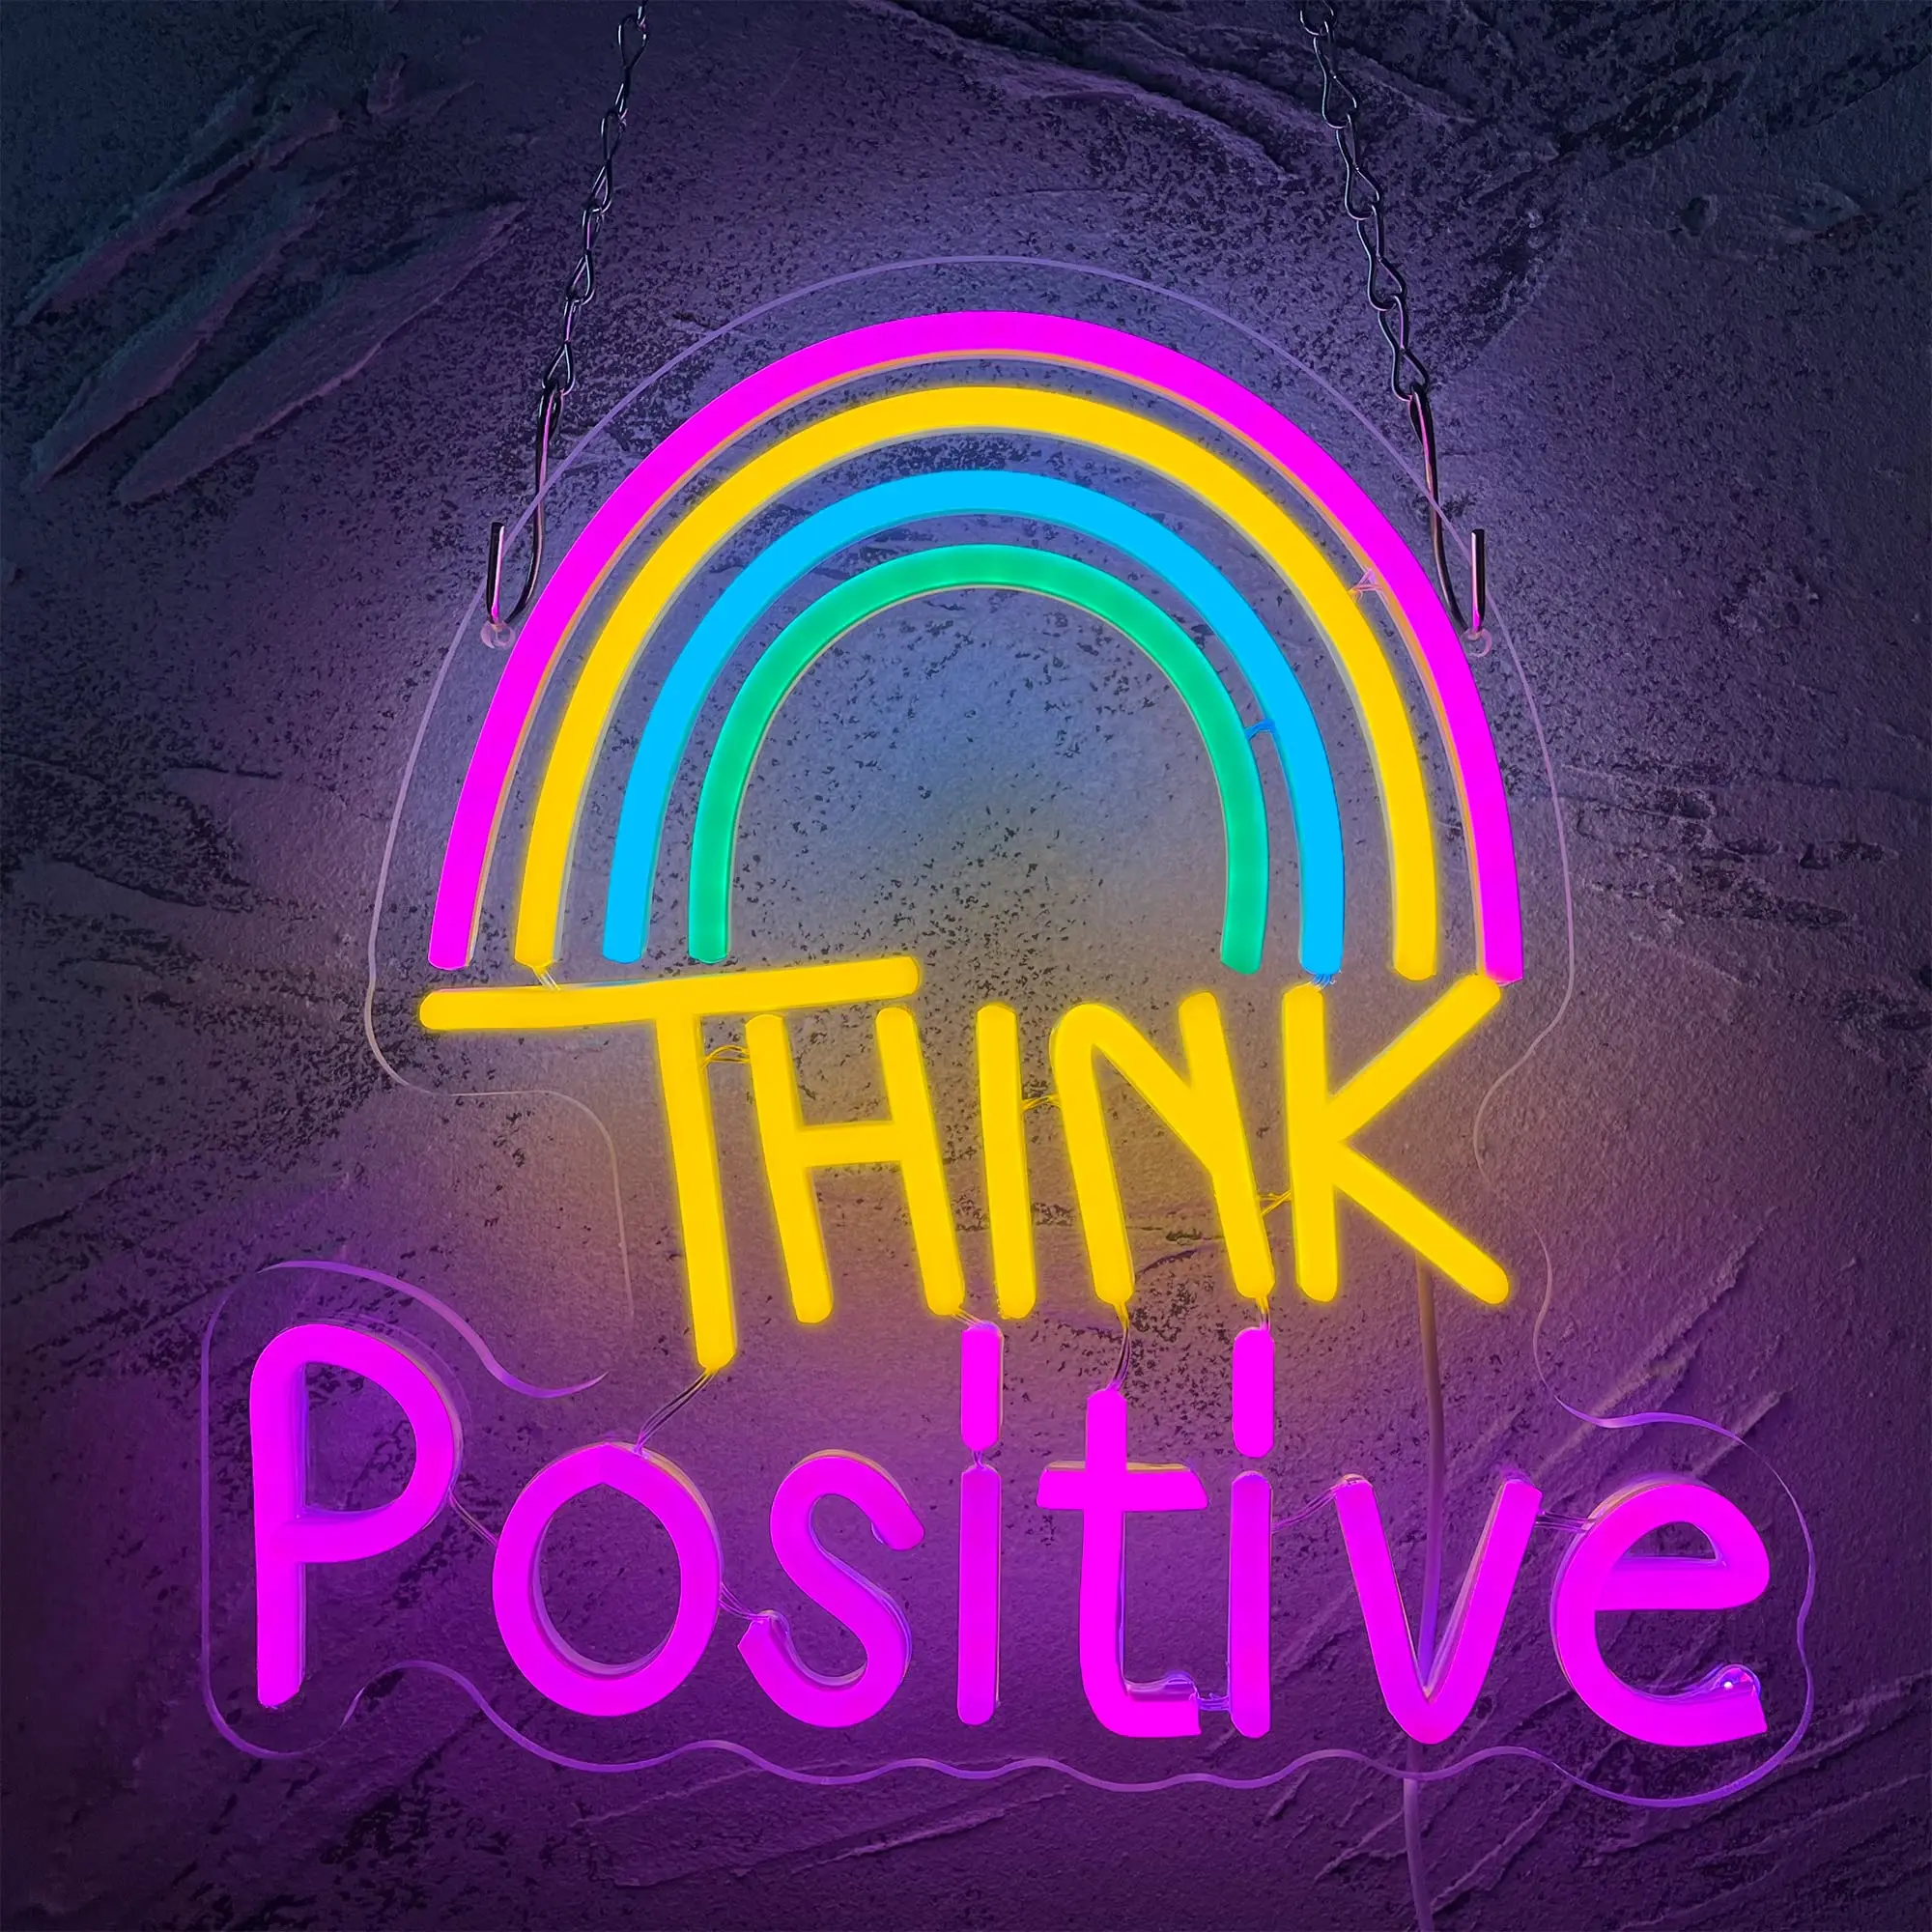 

Think Positive Neon Sign LED Lights USB Signs Bedroom Room Bar Pub Store Club Home Party Wall Art Decor for Room Holiday